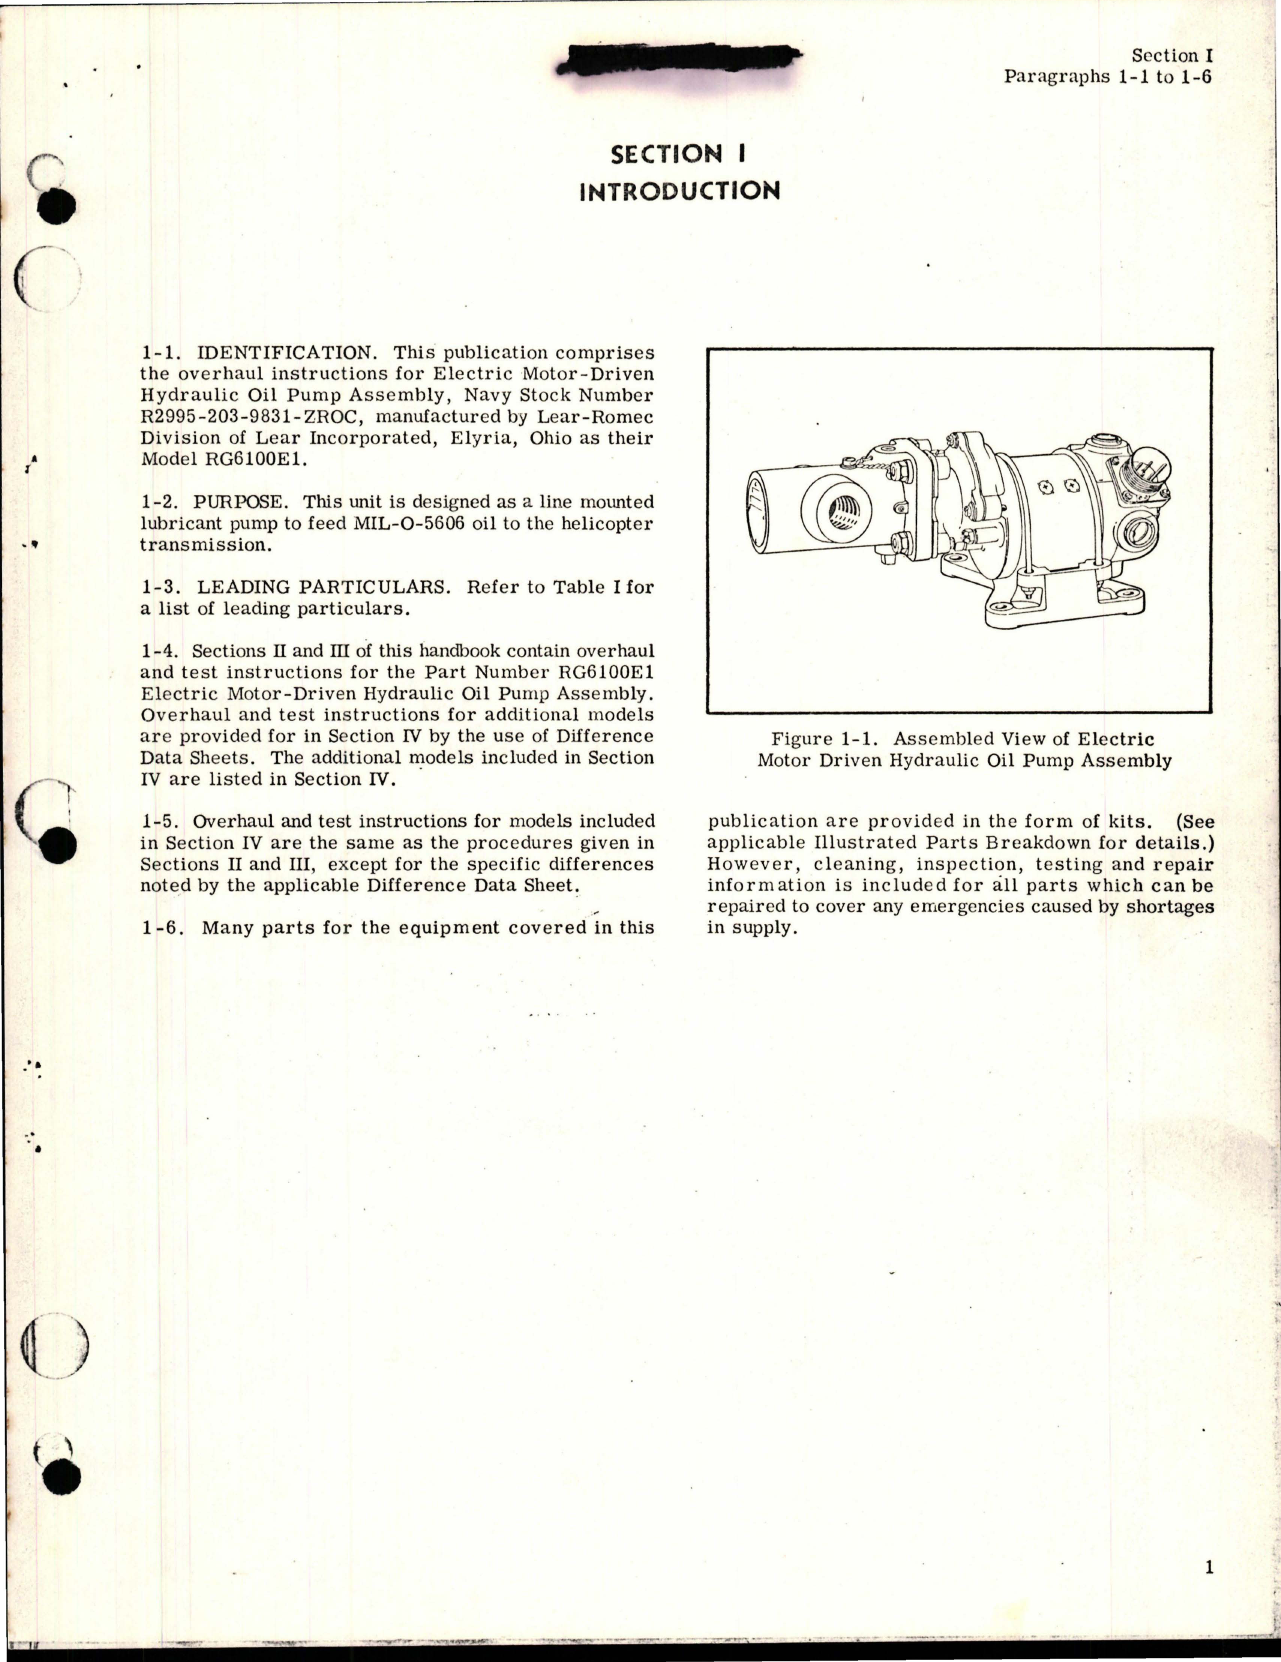 Sample page 5 from AirCorps Library document: Overhaul Instructions for Electric Motor Driven Hydraulic Oil Pump Assembly - Parts RG6100E1 and RG6100H 